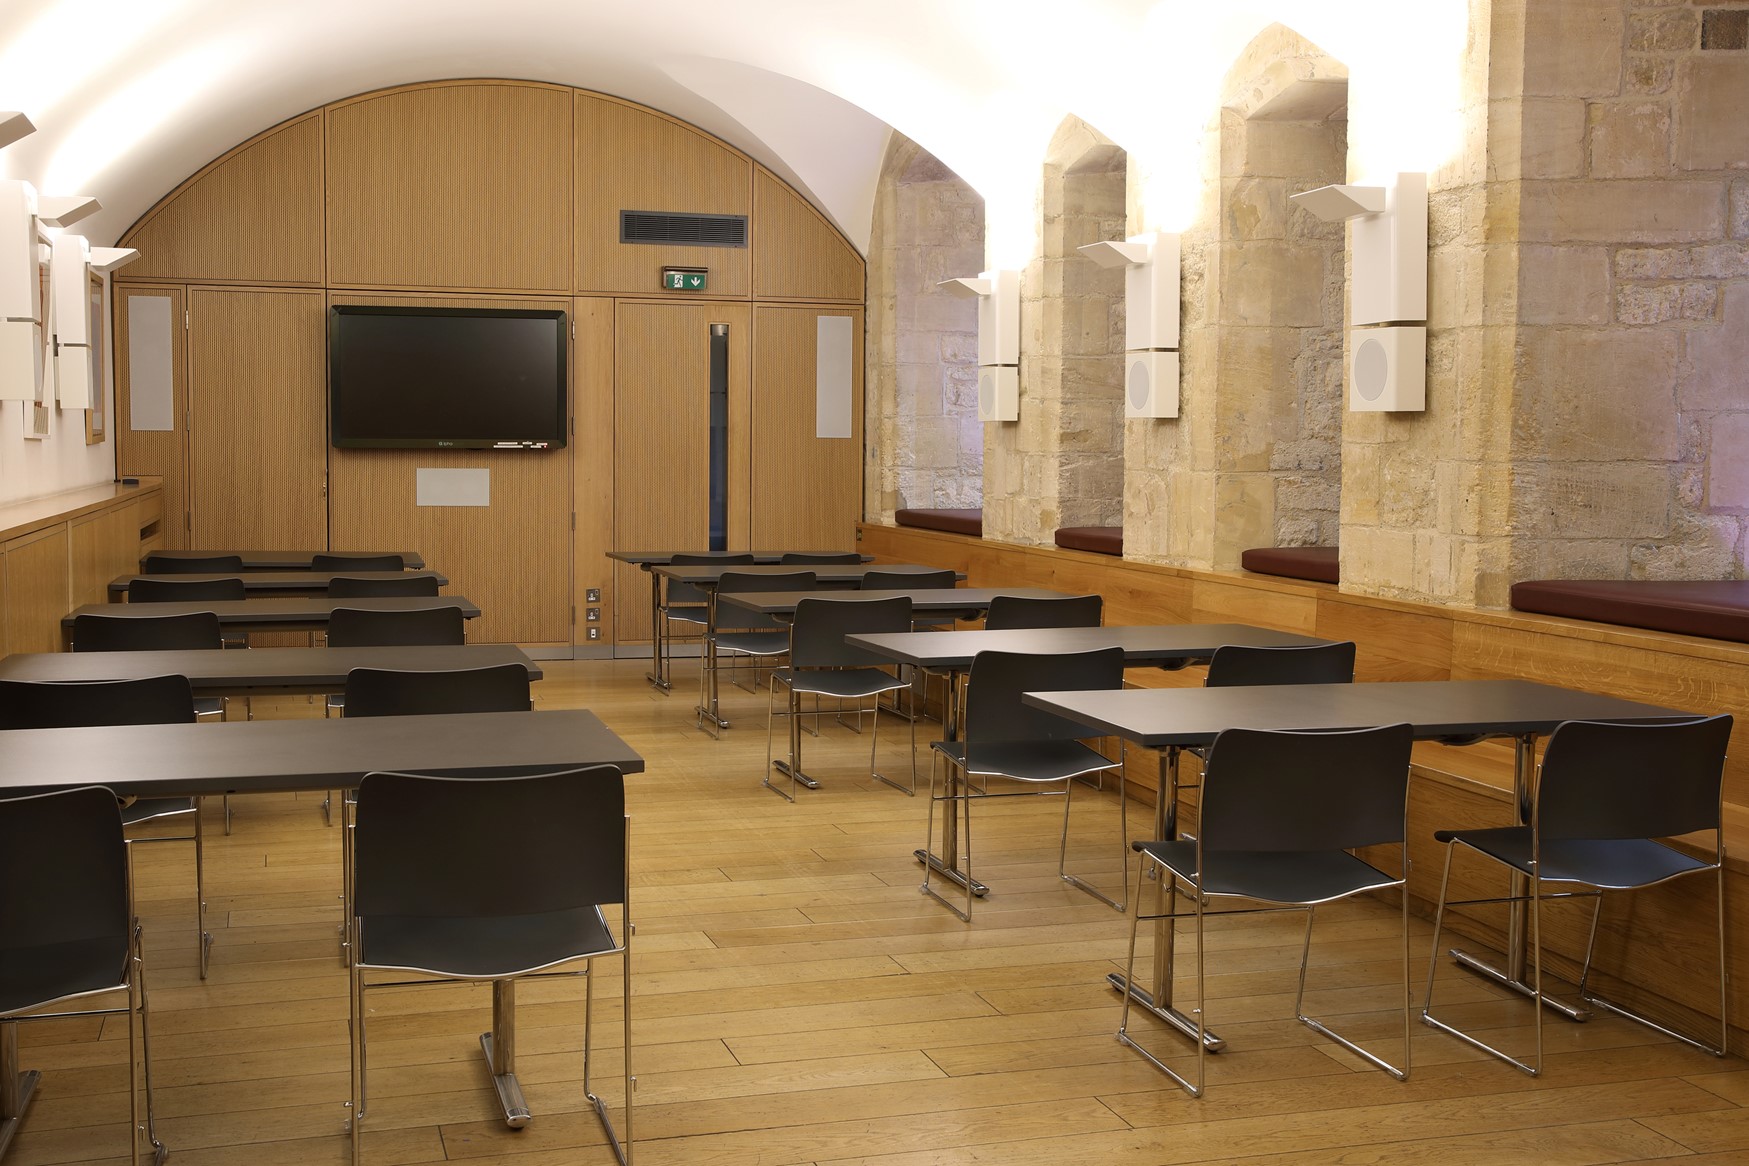 The North Undercroft - a smaller room with 10 desks and two black chairs per desk